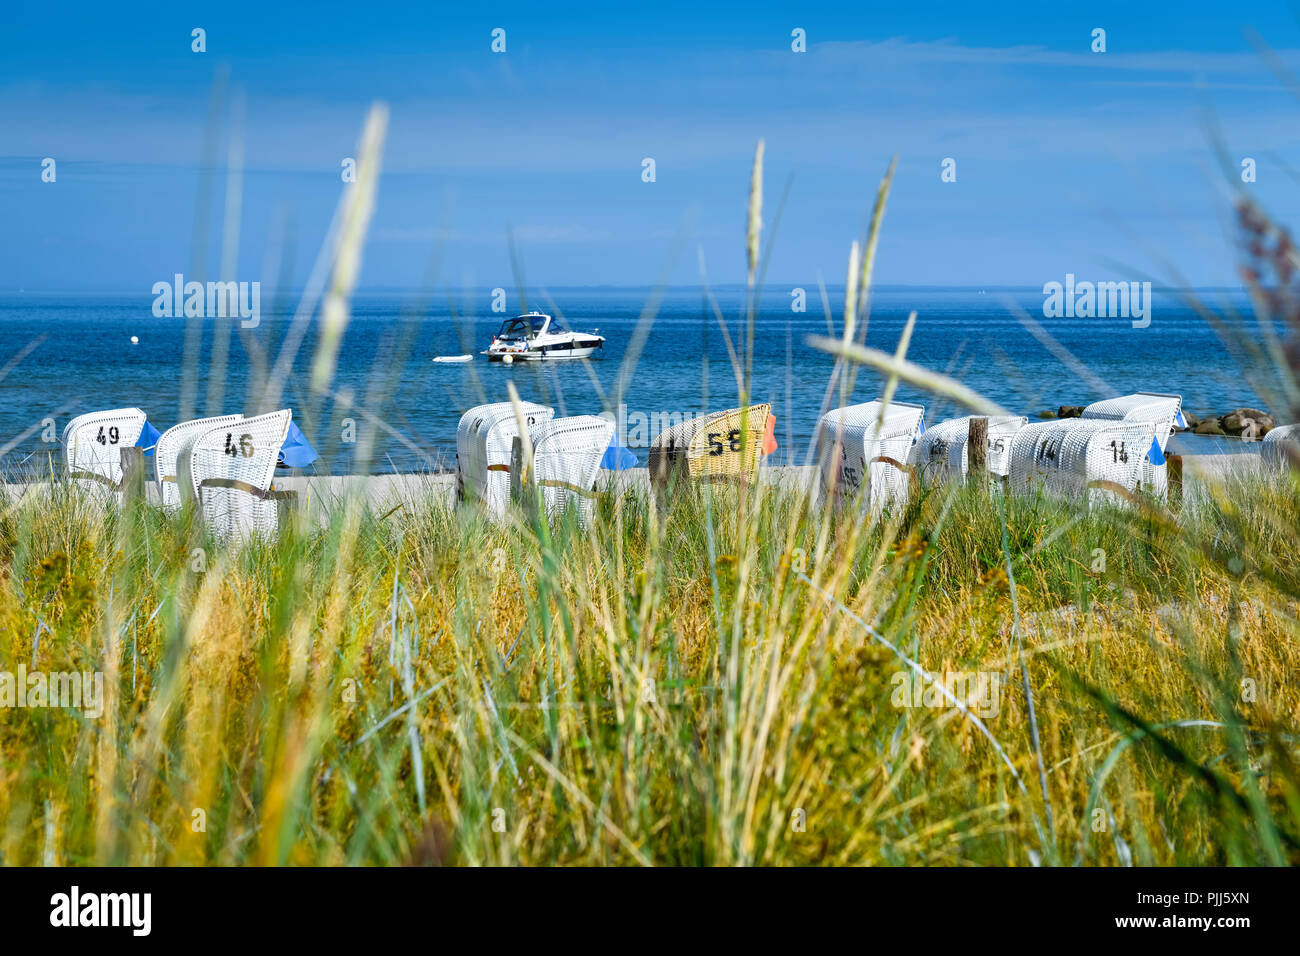 The Baltic Sea and beach in lagoon jug, Schleswig - Holstein, Germany, Europe, Ostsee und Strand in Haffkrug, Schleswig-Holstein, Deutschland, Europa Stock Photo